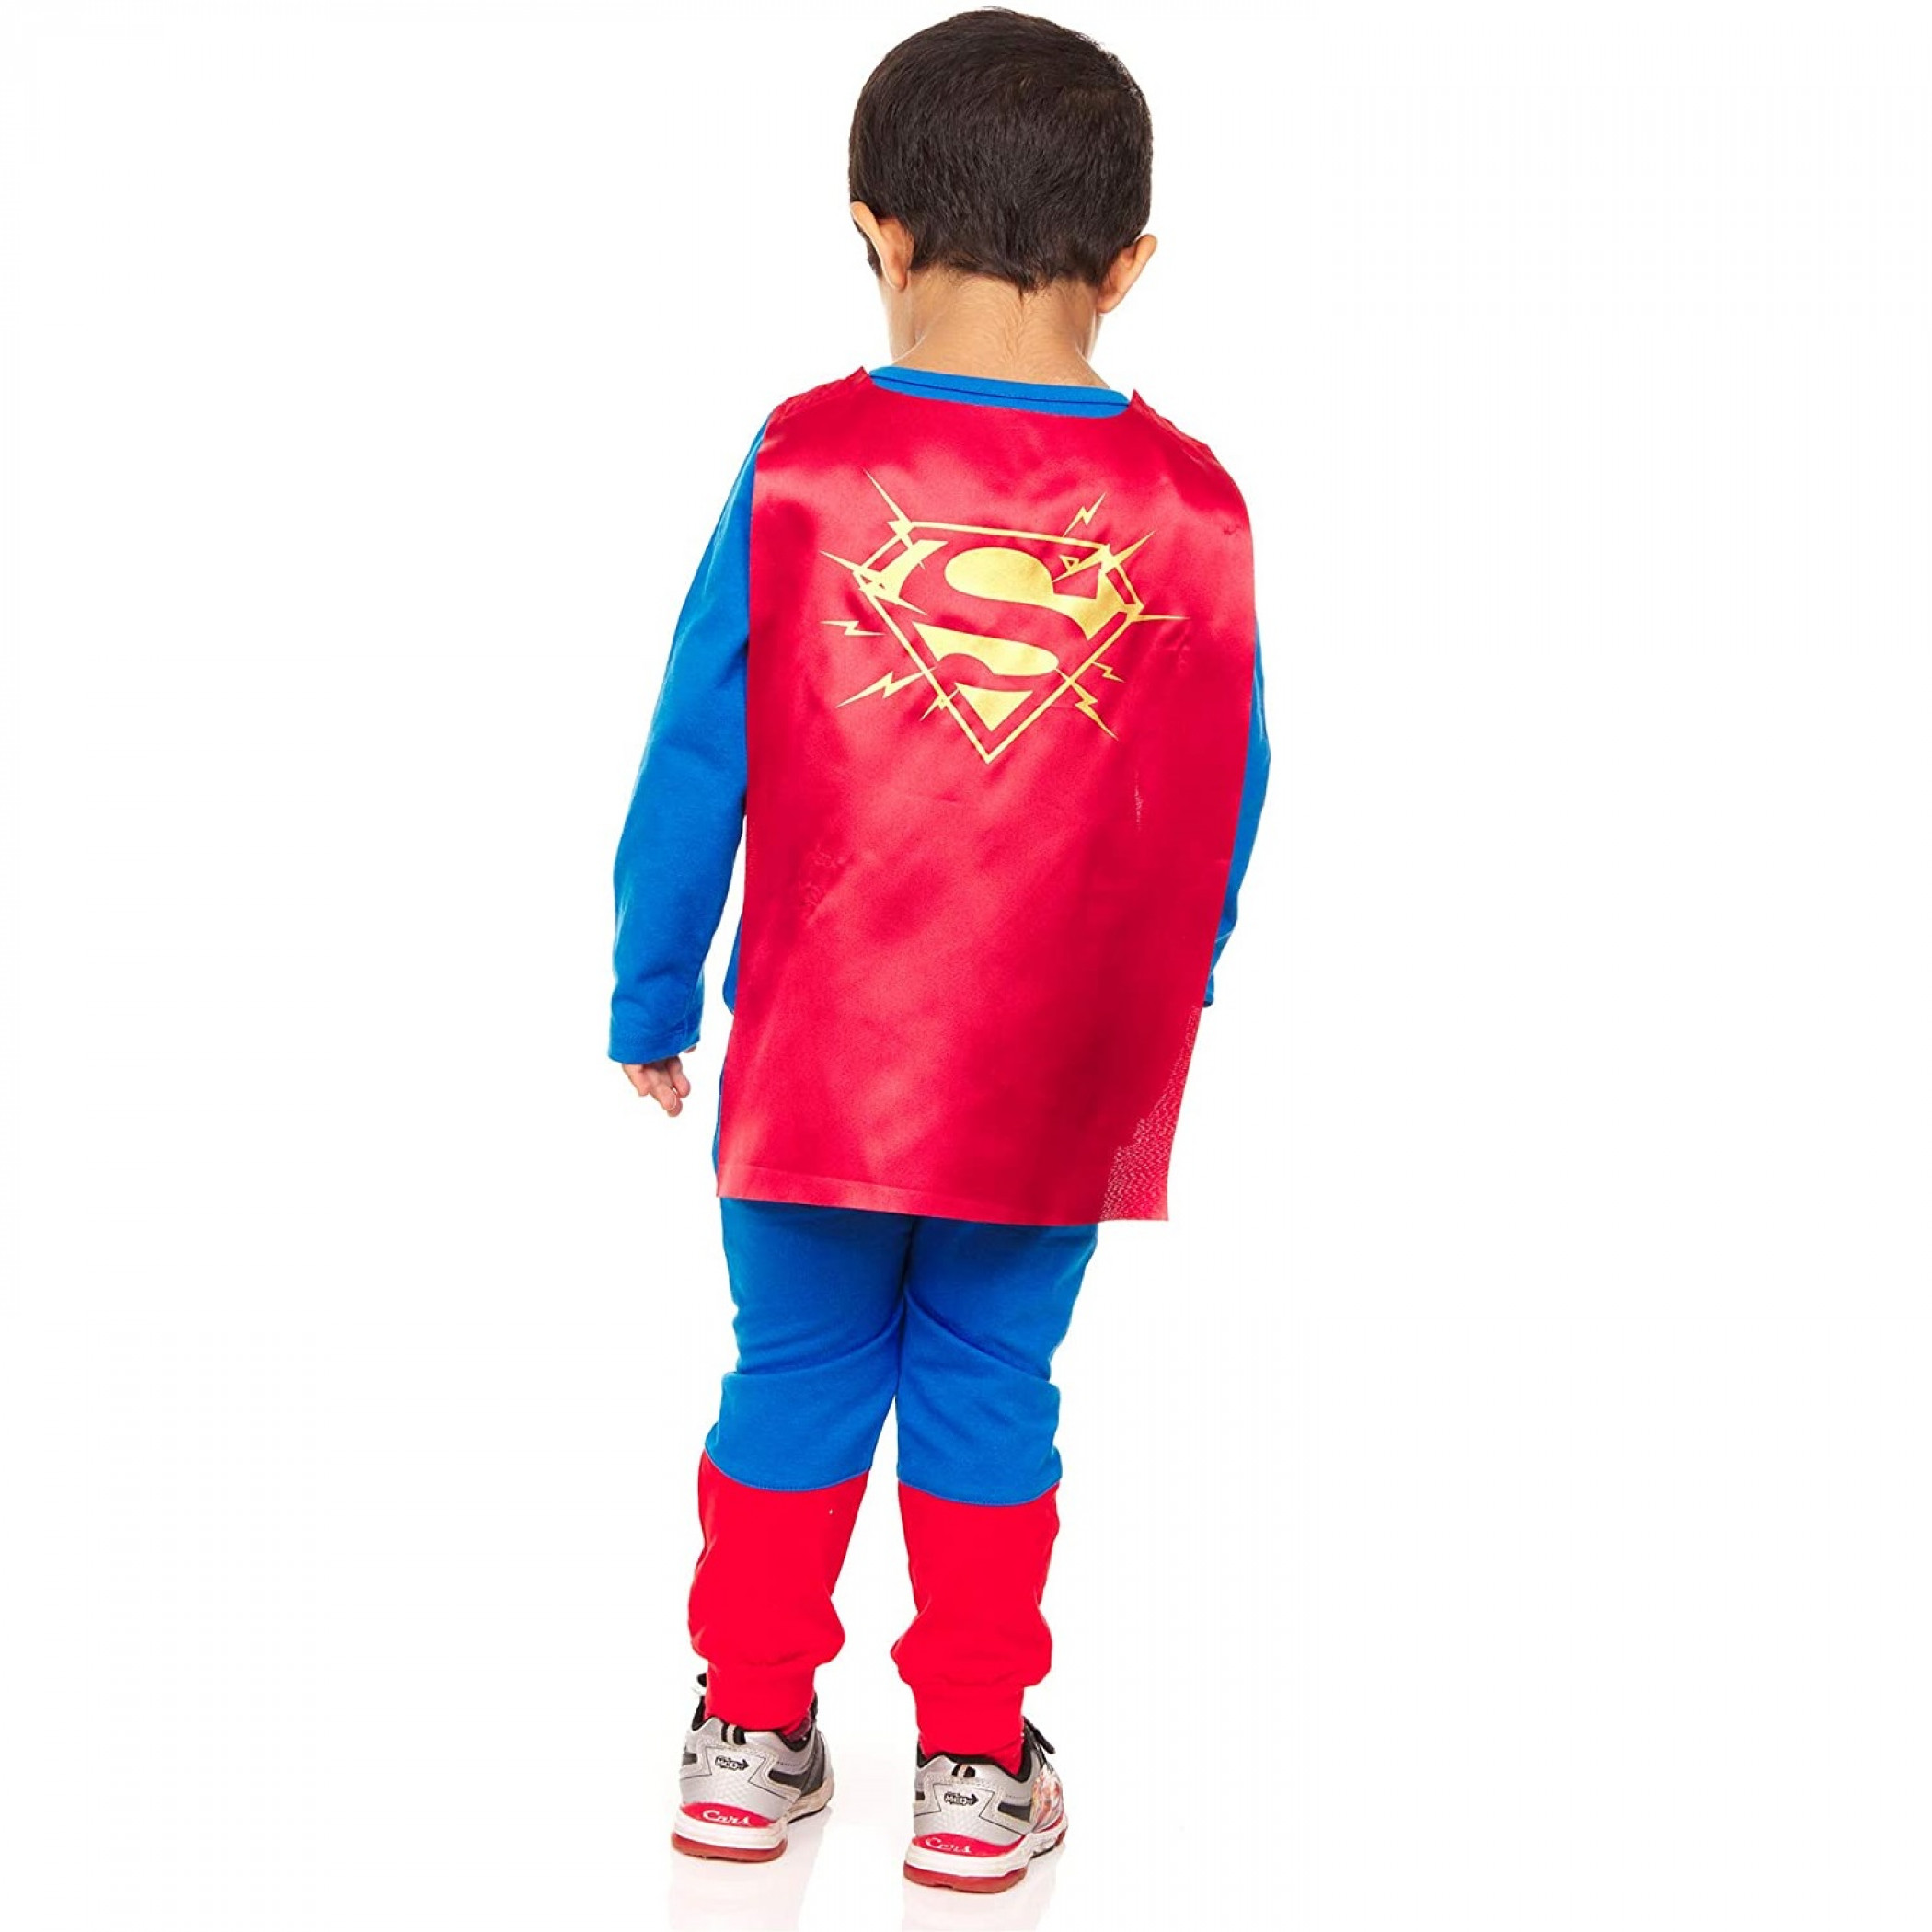 Superman Toddler Dress Up Costume Suit with Cape